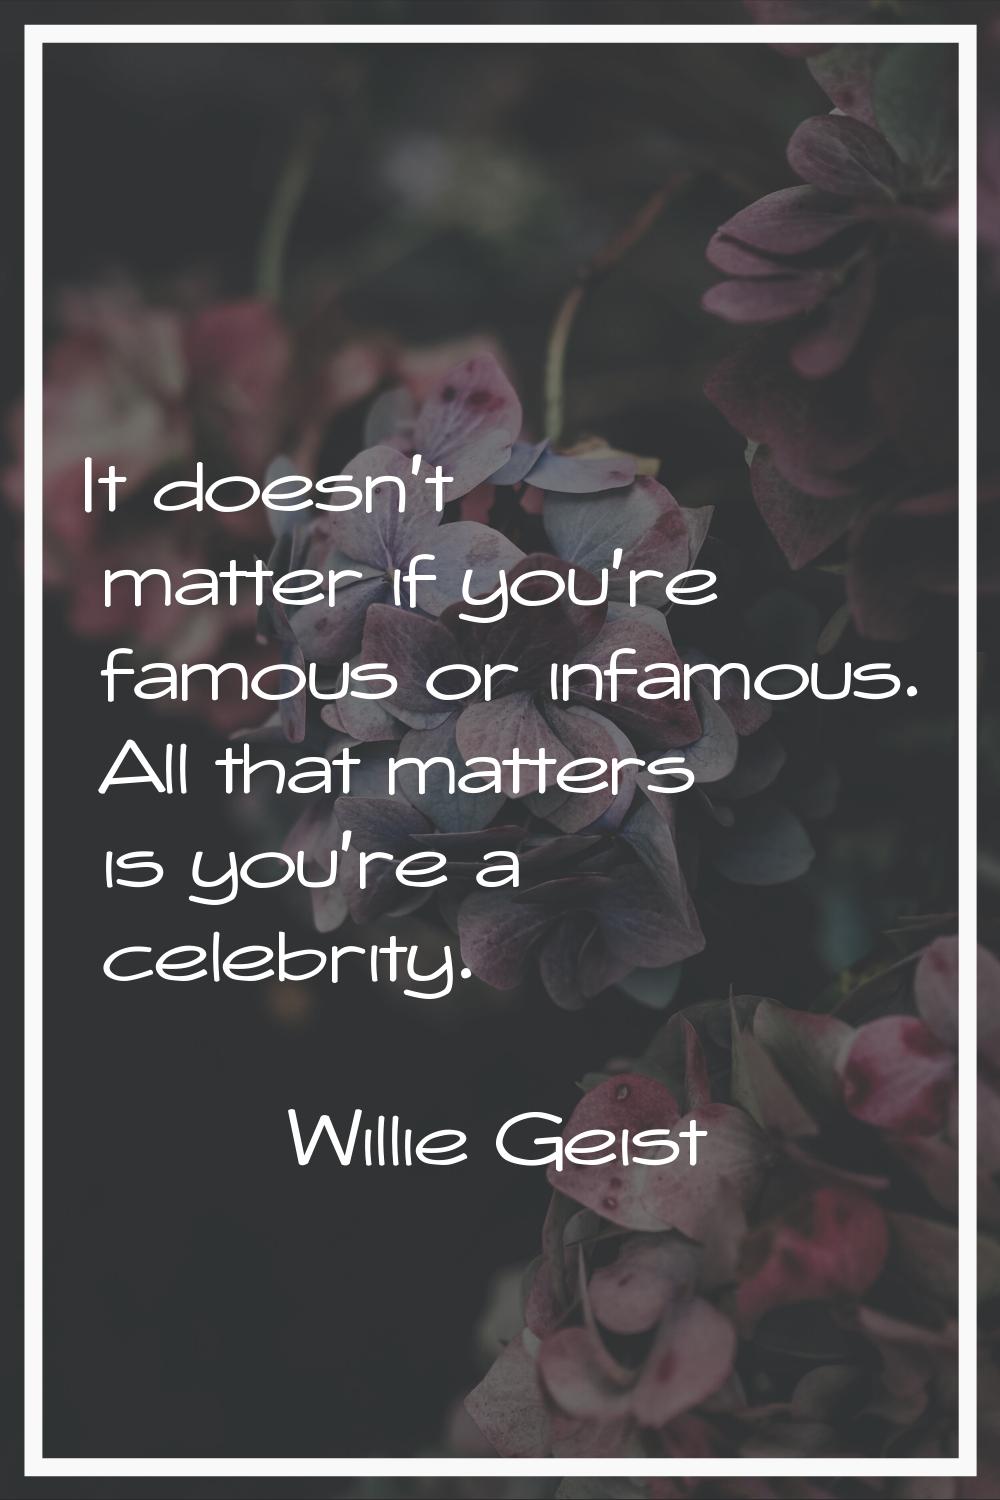 It doesn't matter if you're famous or infamous. All that matters is you're a celebrity.